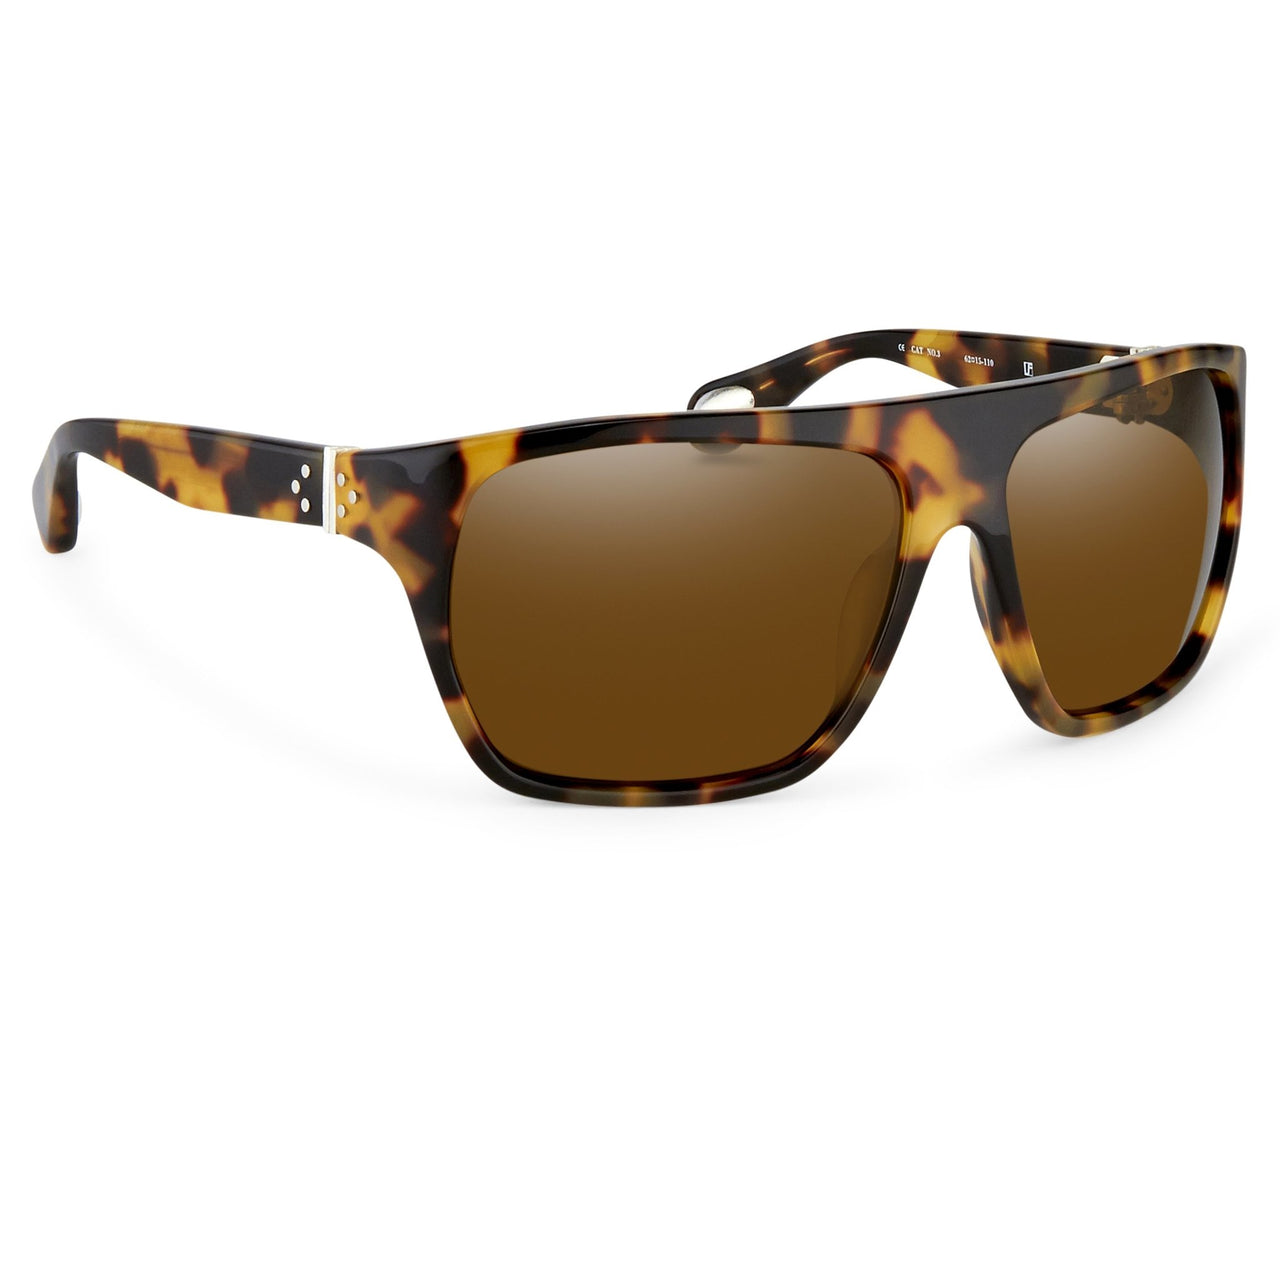 Ann Demeulemeester Sunglasses Oversized Tortoise Shell 925 Silver with Brown Lenses CAT3 AD31C2SUN - Watches & Crystals